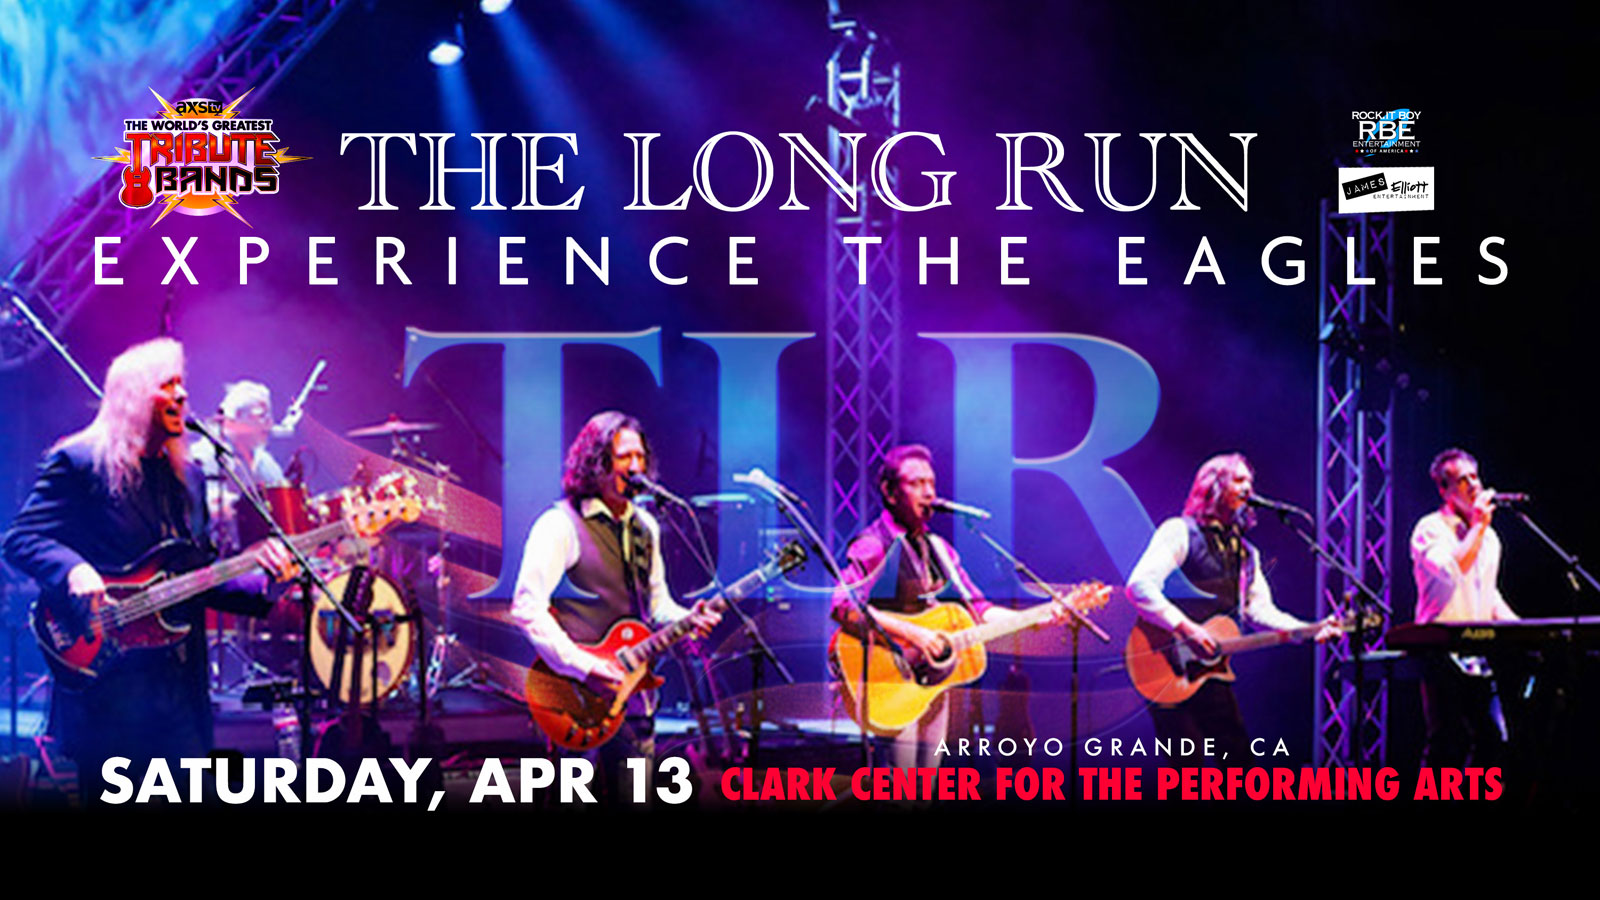 Musicians playing on stage as The Eagles with title The Long Run